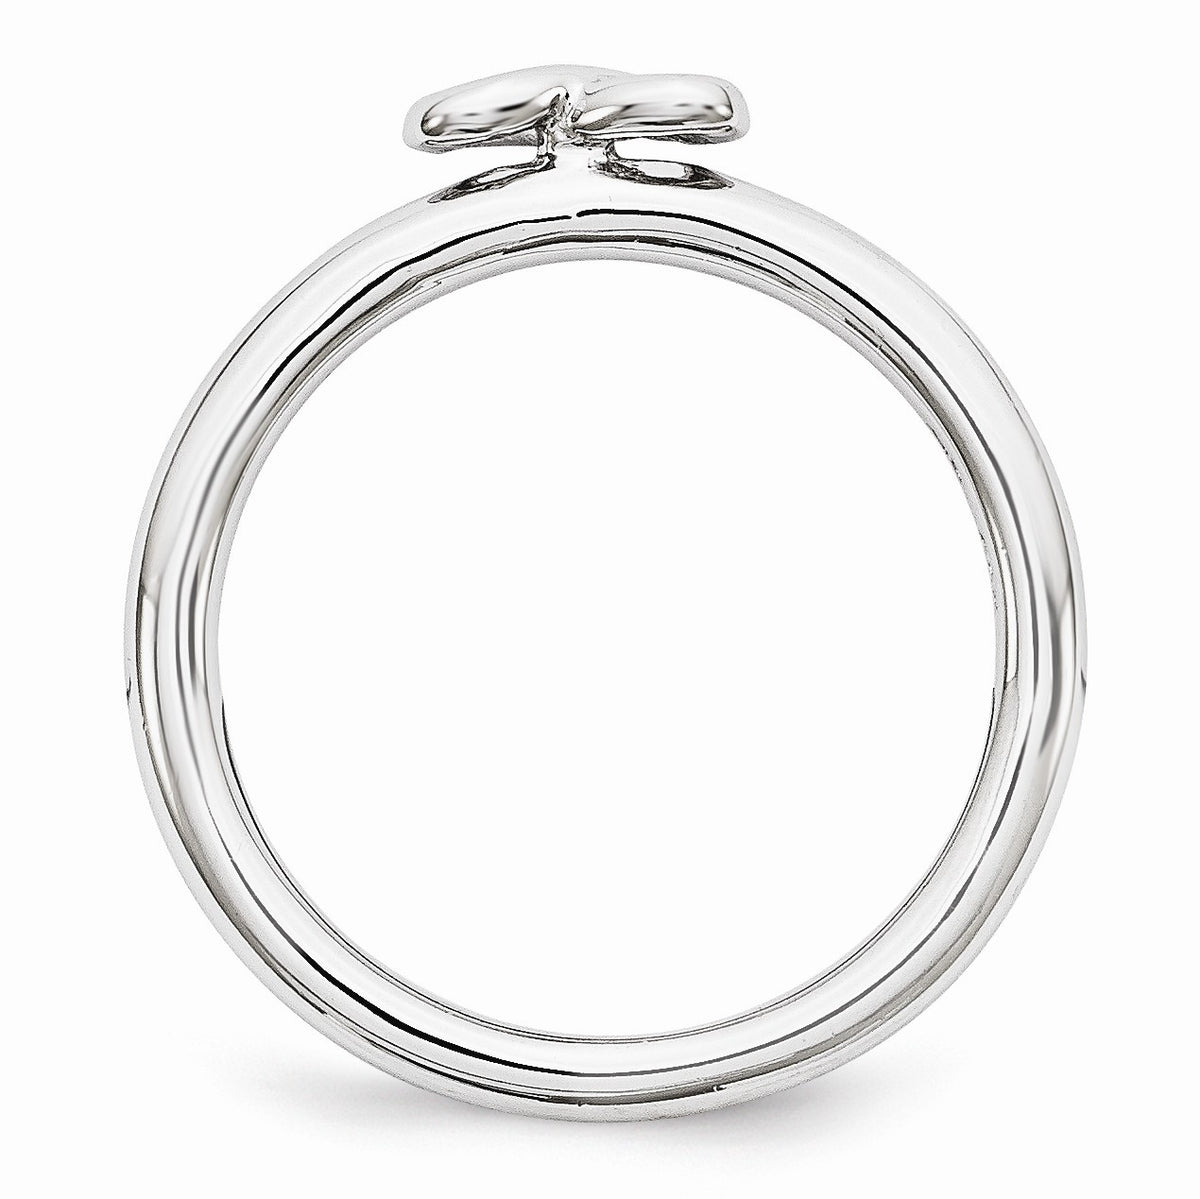 Alternate view of the Rhodium Plated Sterling Silver Stackable 2.5mm Infinity Symbol Ring by The Black Bow Jewelry Co.